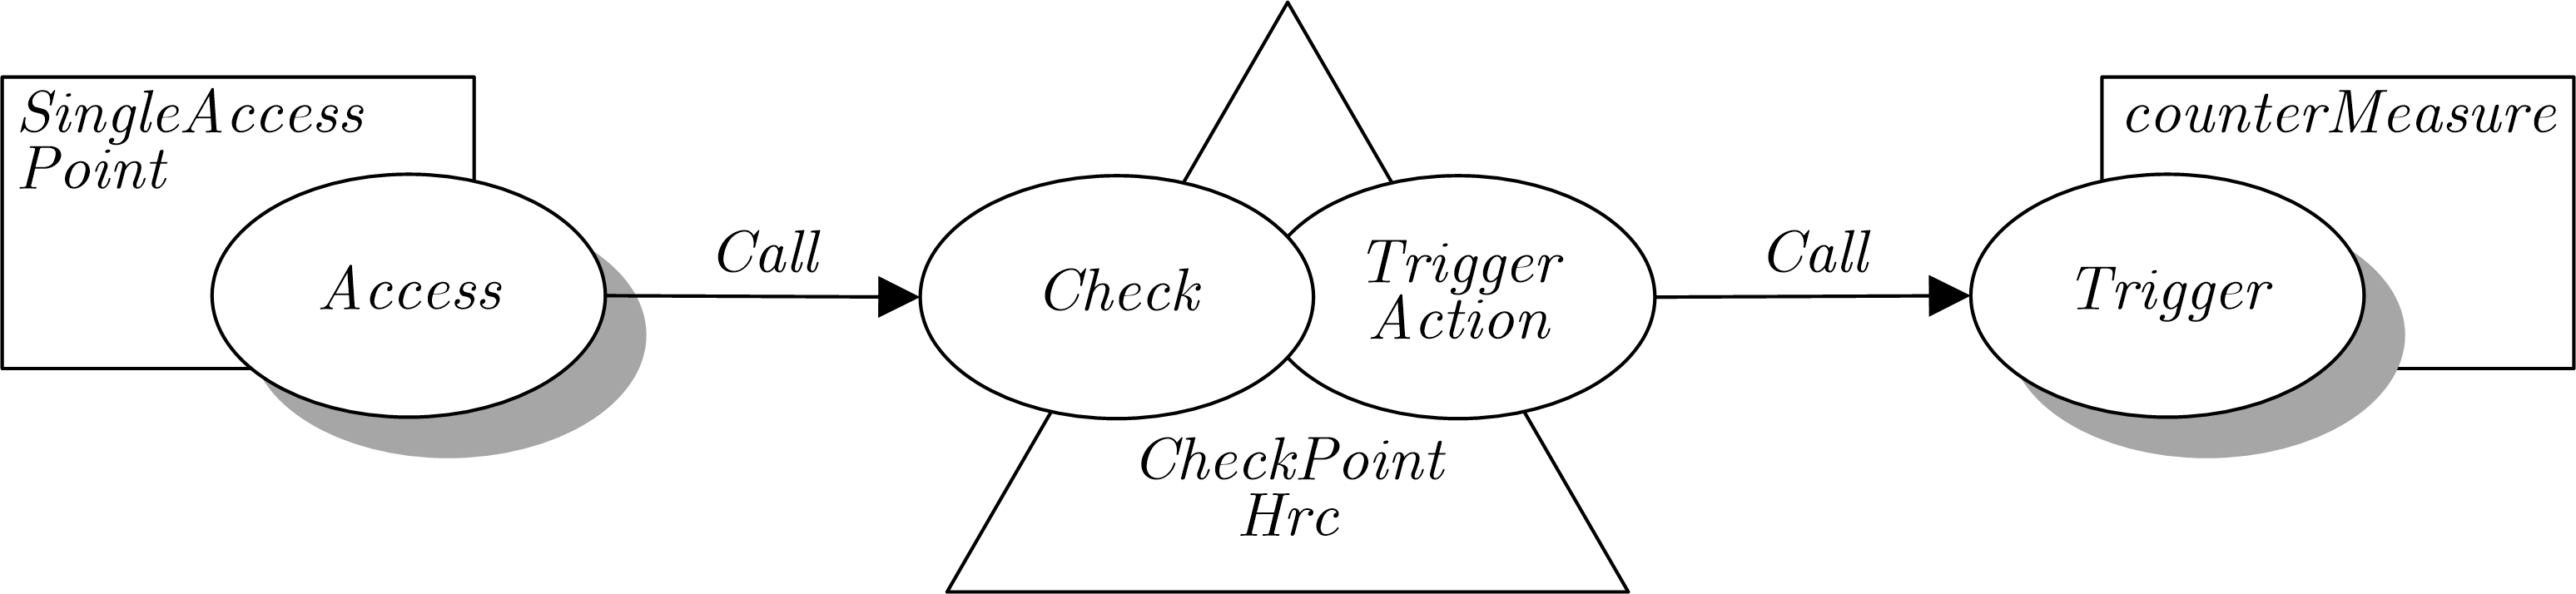 Codechart of the Check-Point Pattern